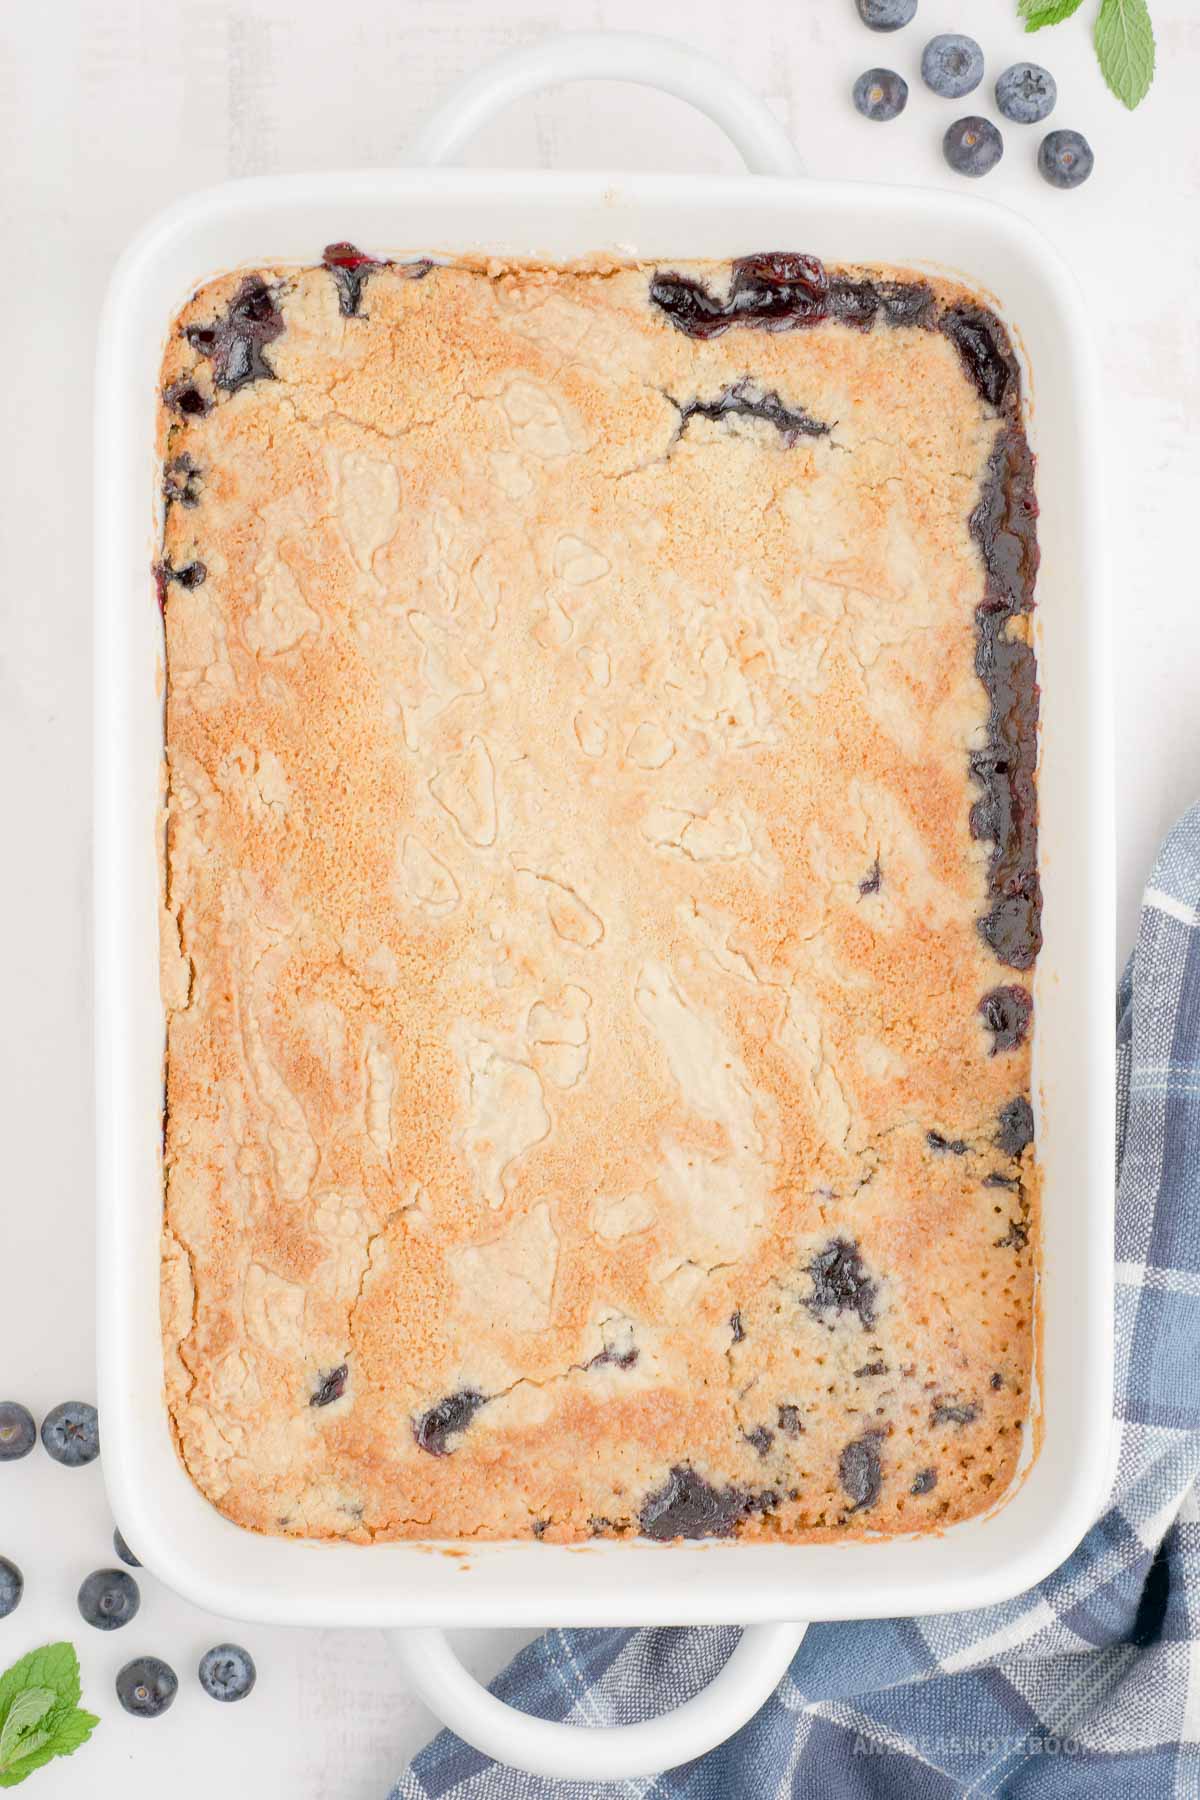 Fully baked blueberry dump cake in a baking dish.